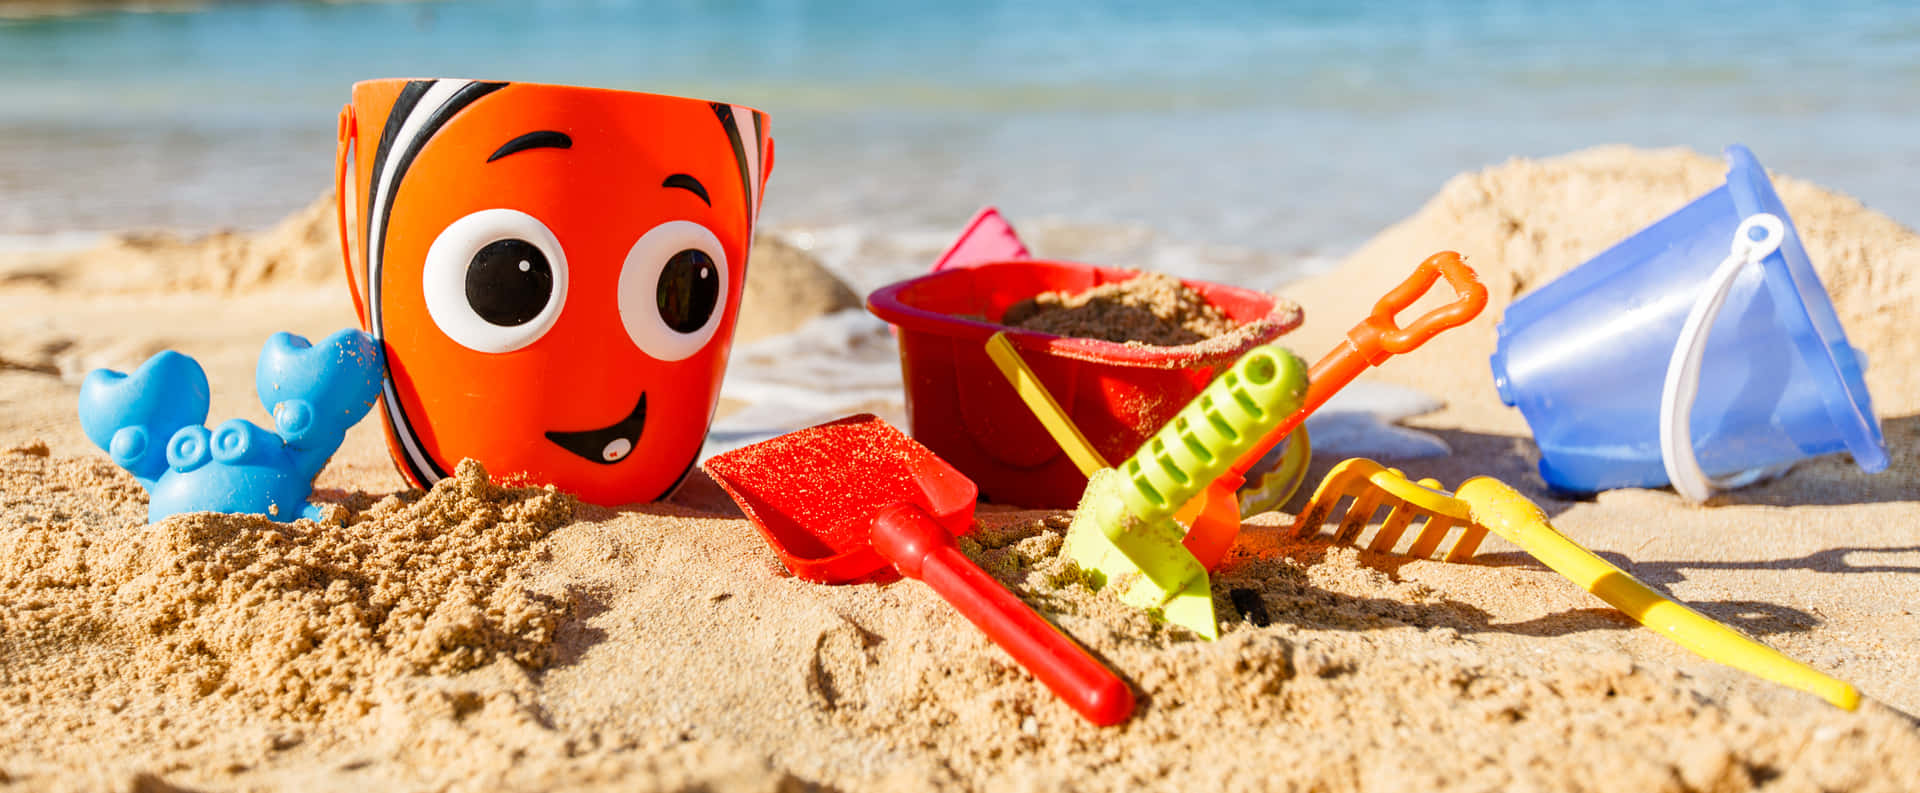 A Colorful Collection of Beach Toys on the Sandy Shore Wallpaper